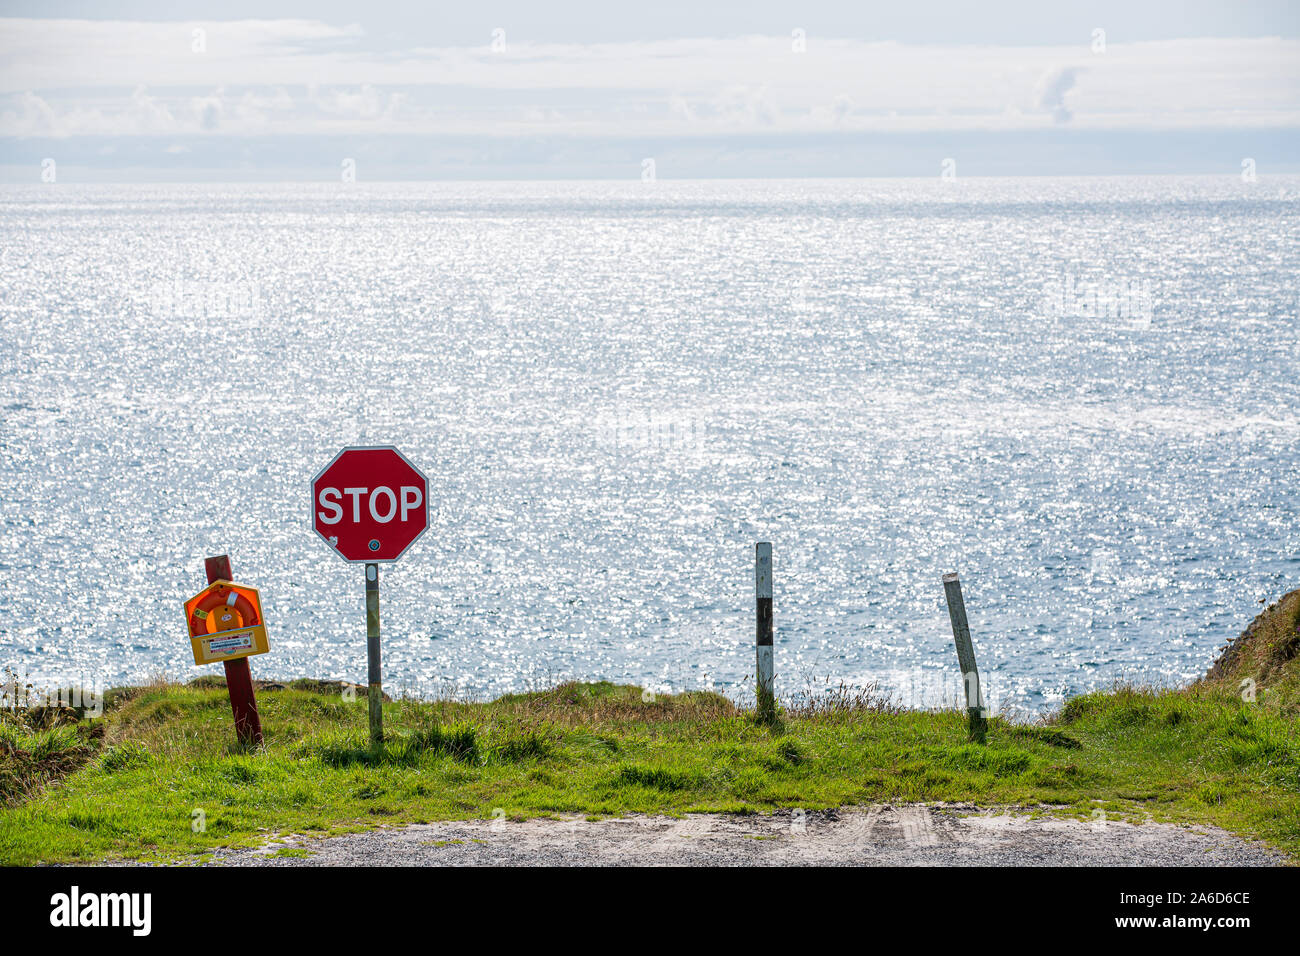 Abrupt end of the road at the verge of a cliff marked with a stop sign and a rescue buoy. County Cork, Ireland Stock Photo